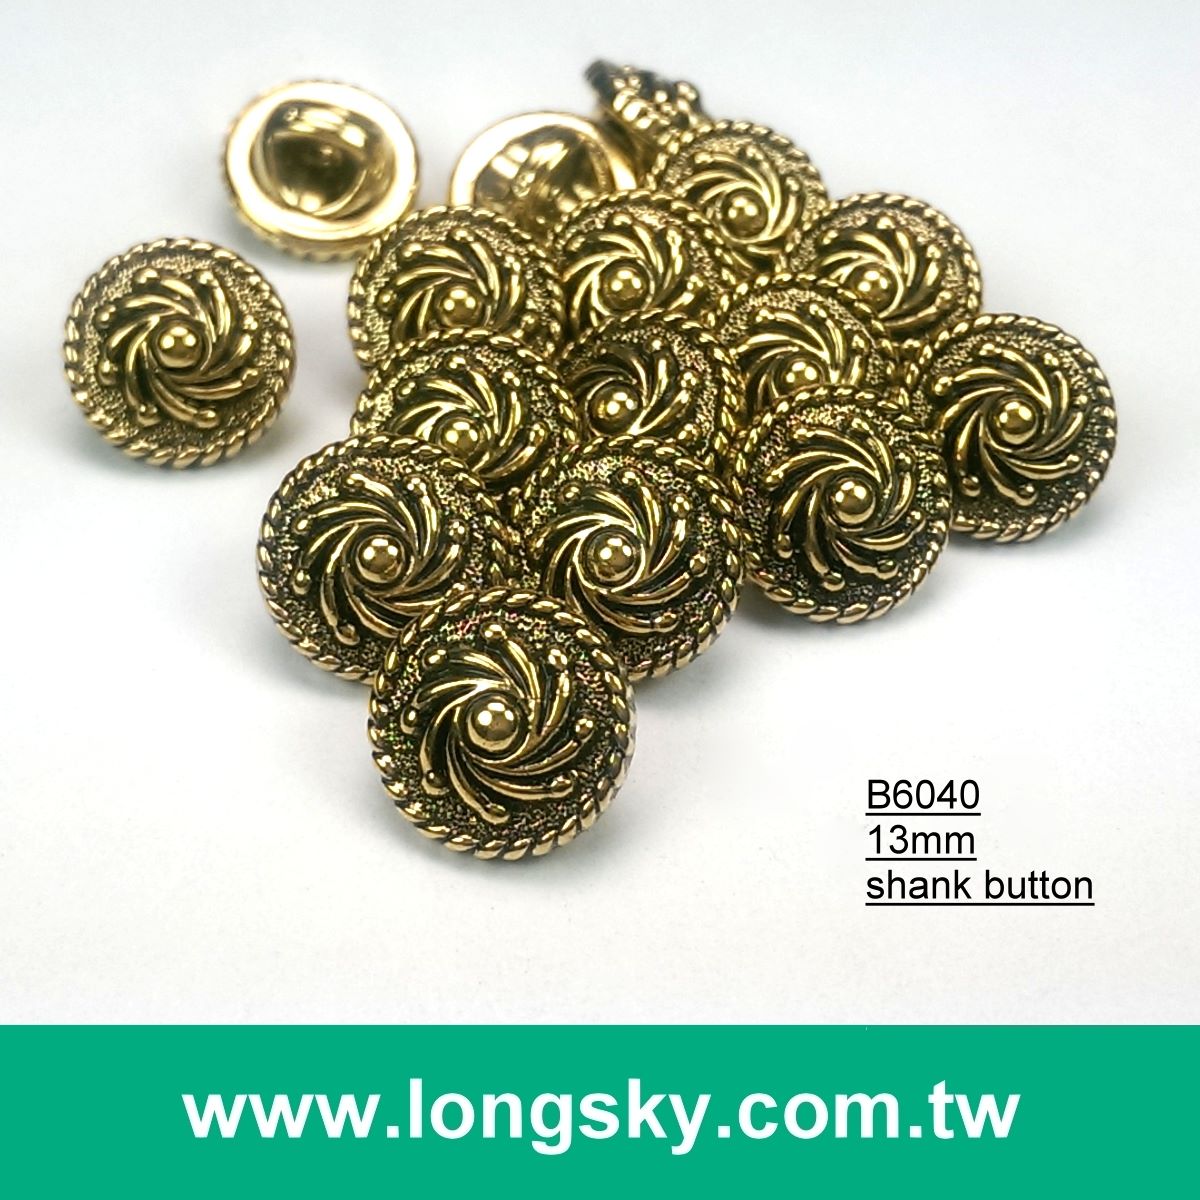 (#B6040/13mm) Taiwan fancy anthentic plated swirl pattern small shirt buttons with shank